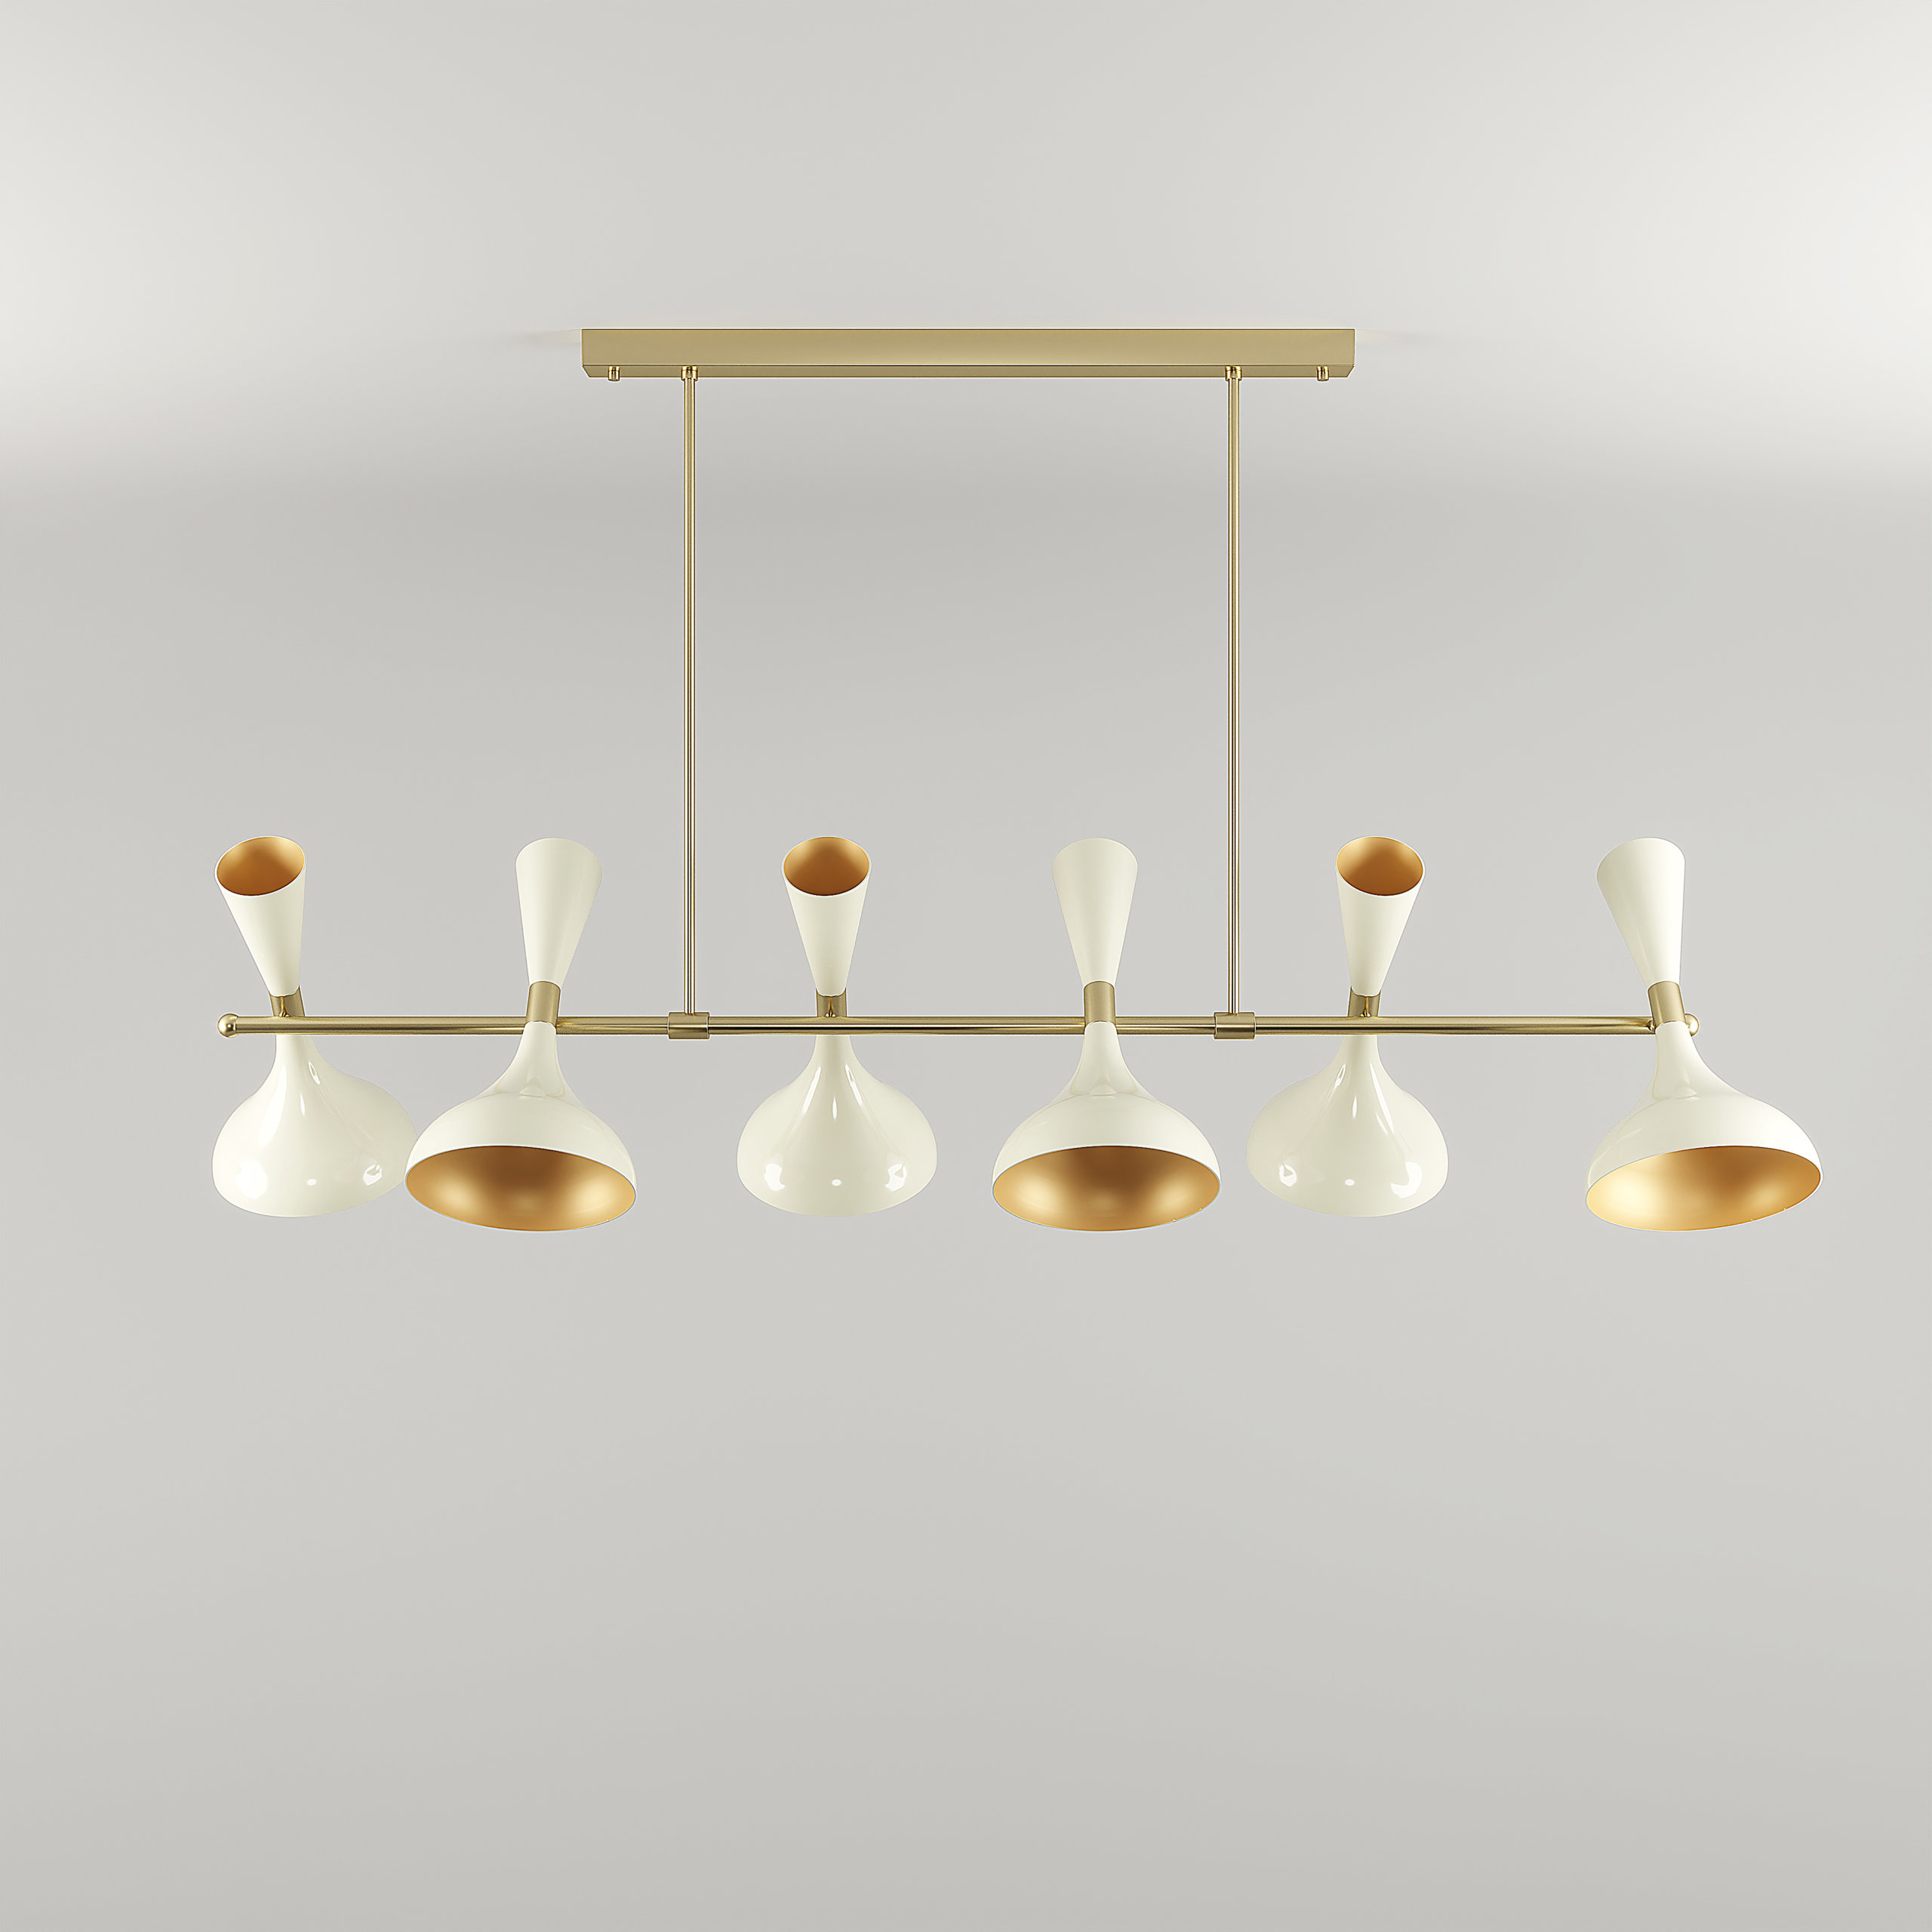 zuiden logica Mens Helsinki II Suspension Lamp By Creativemary Passionate